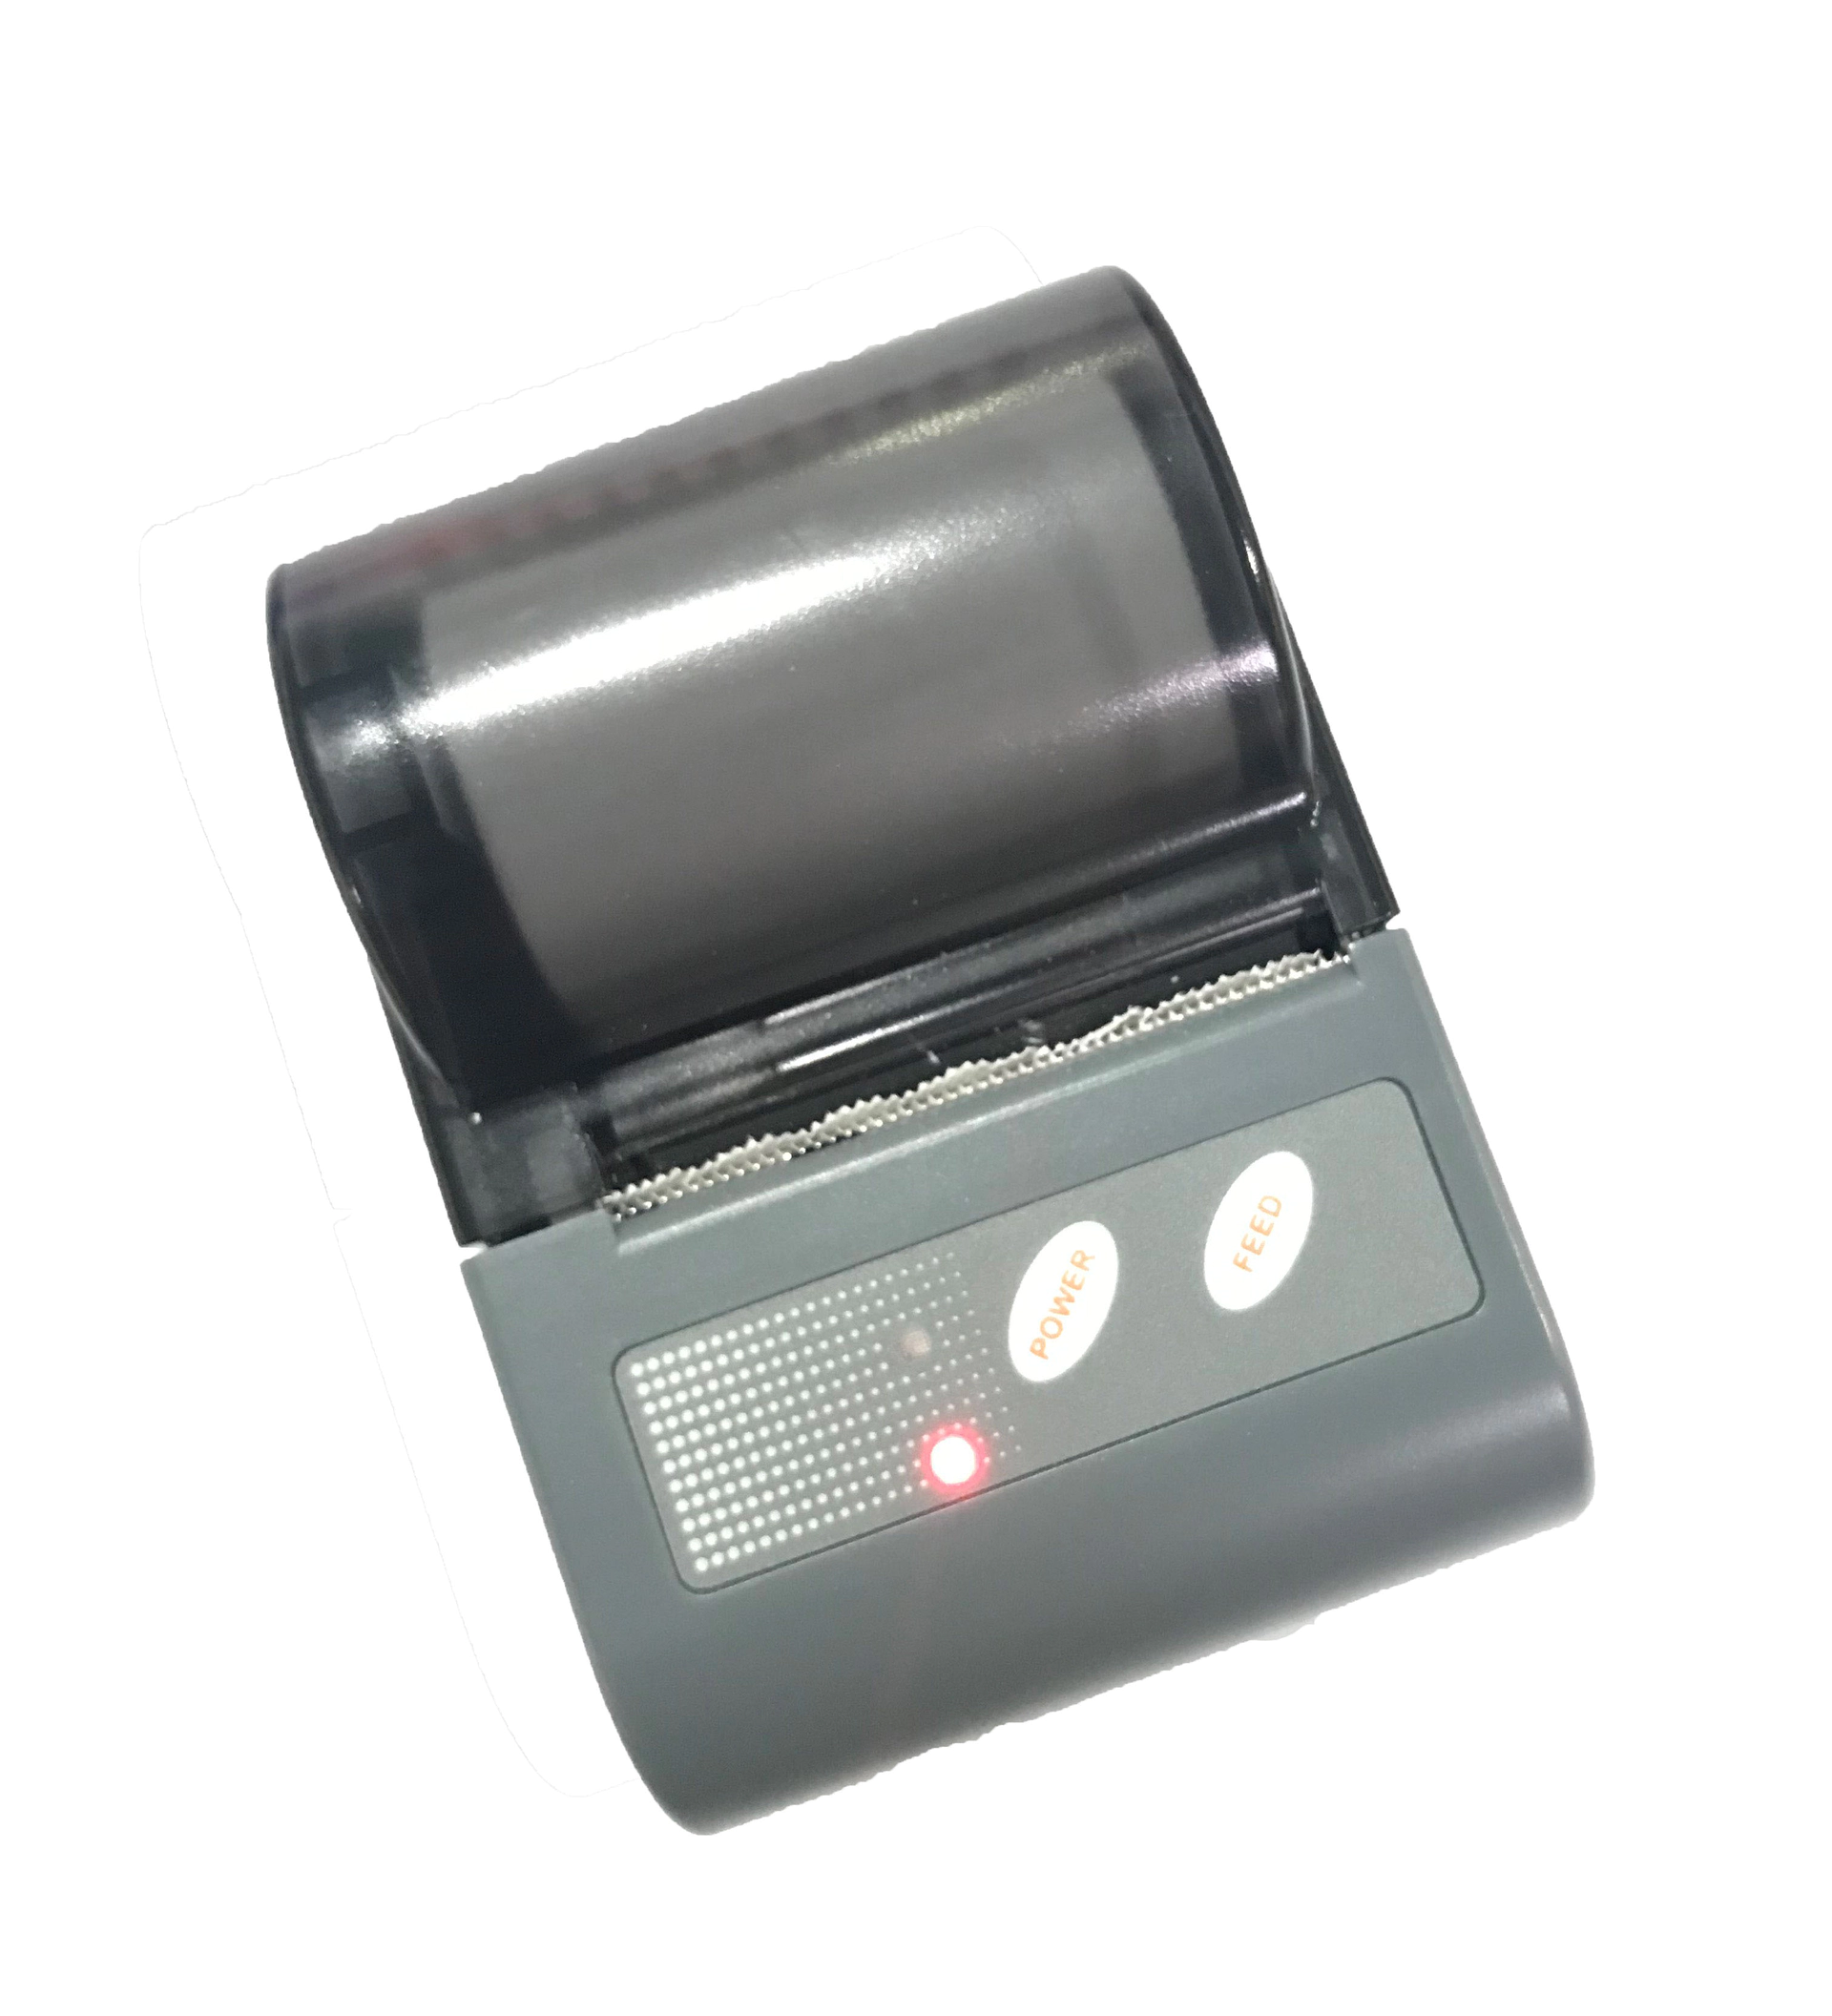 Mini Bluetooth Thermal Printer for Android Mobile Phone Tablet and PC